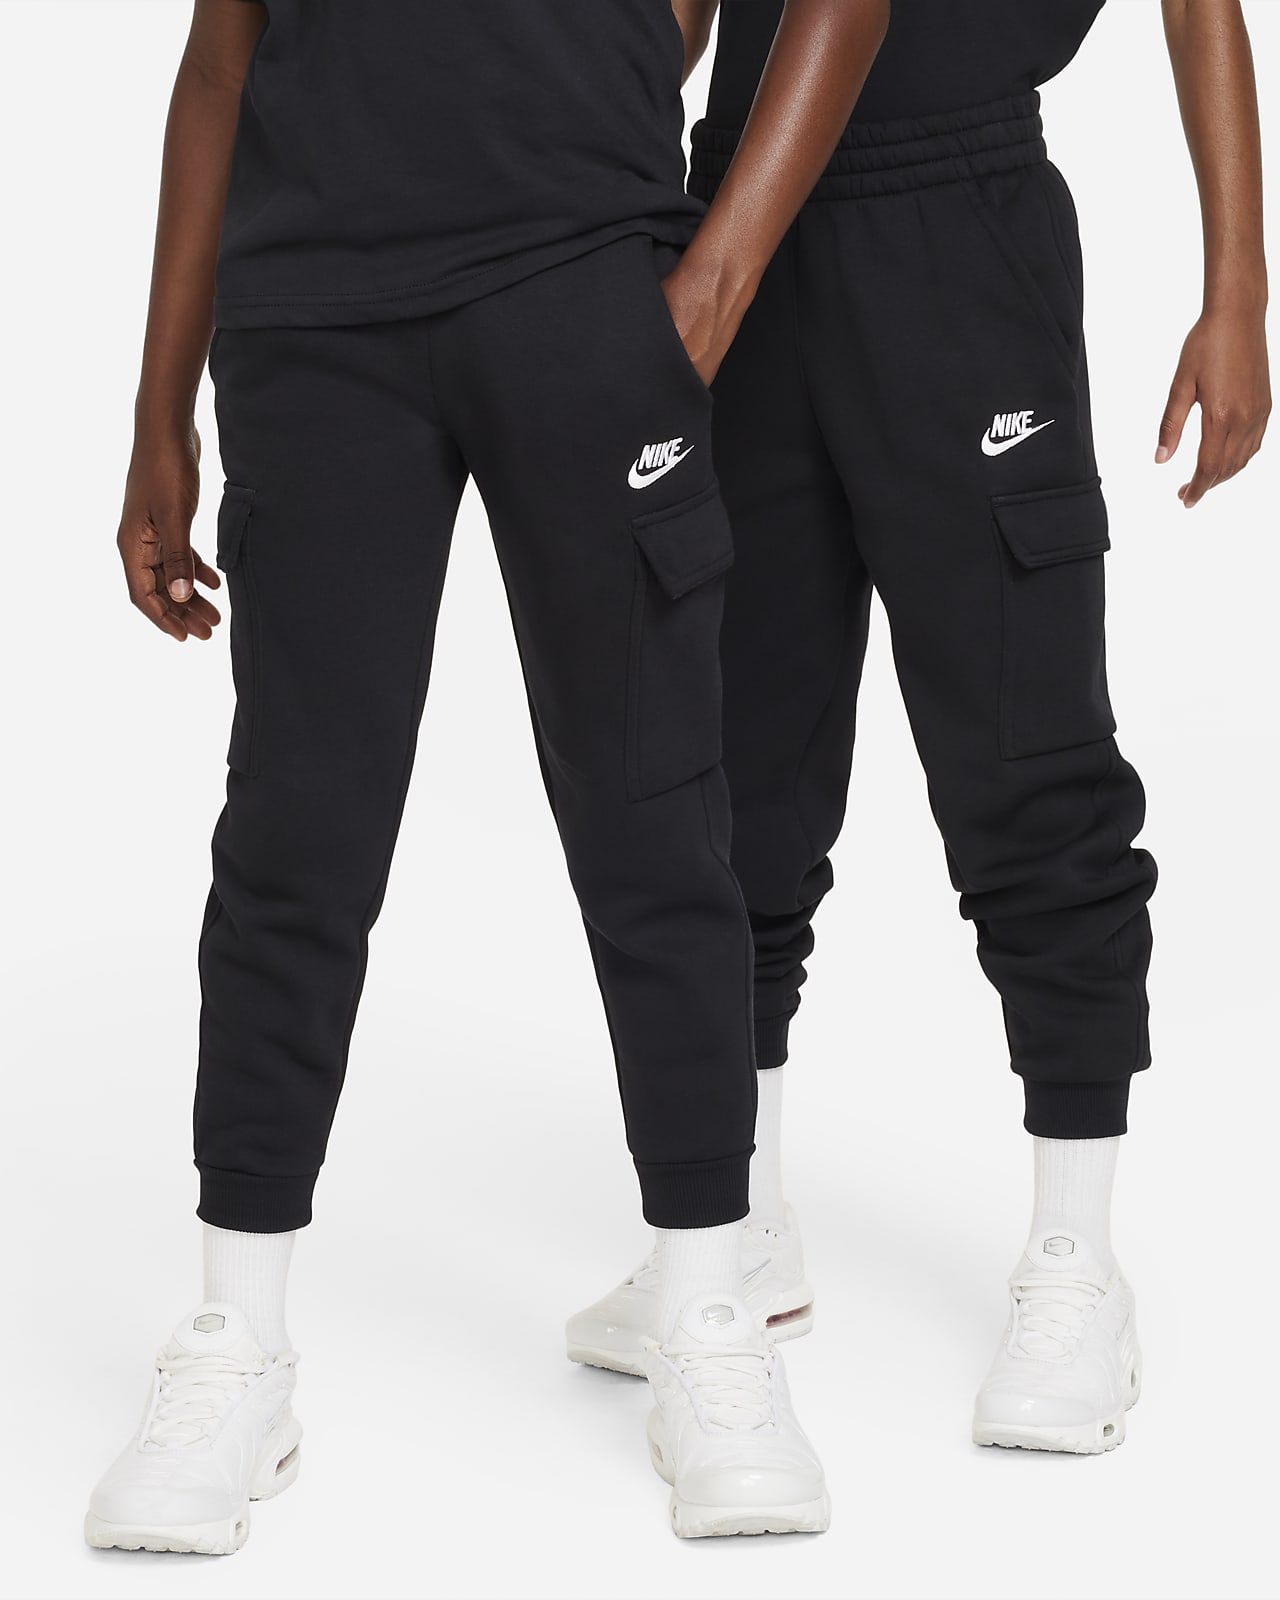 Look Sporty and Stylish with Nike Rise Club Cargo Pants